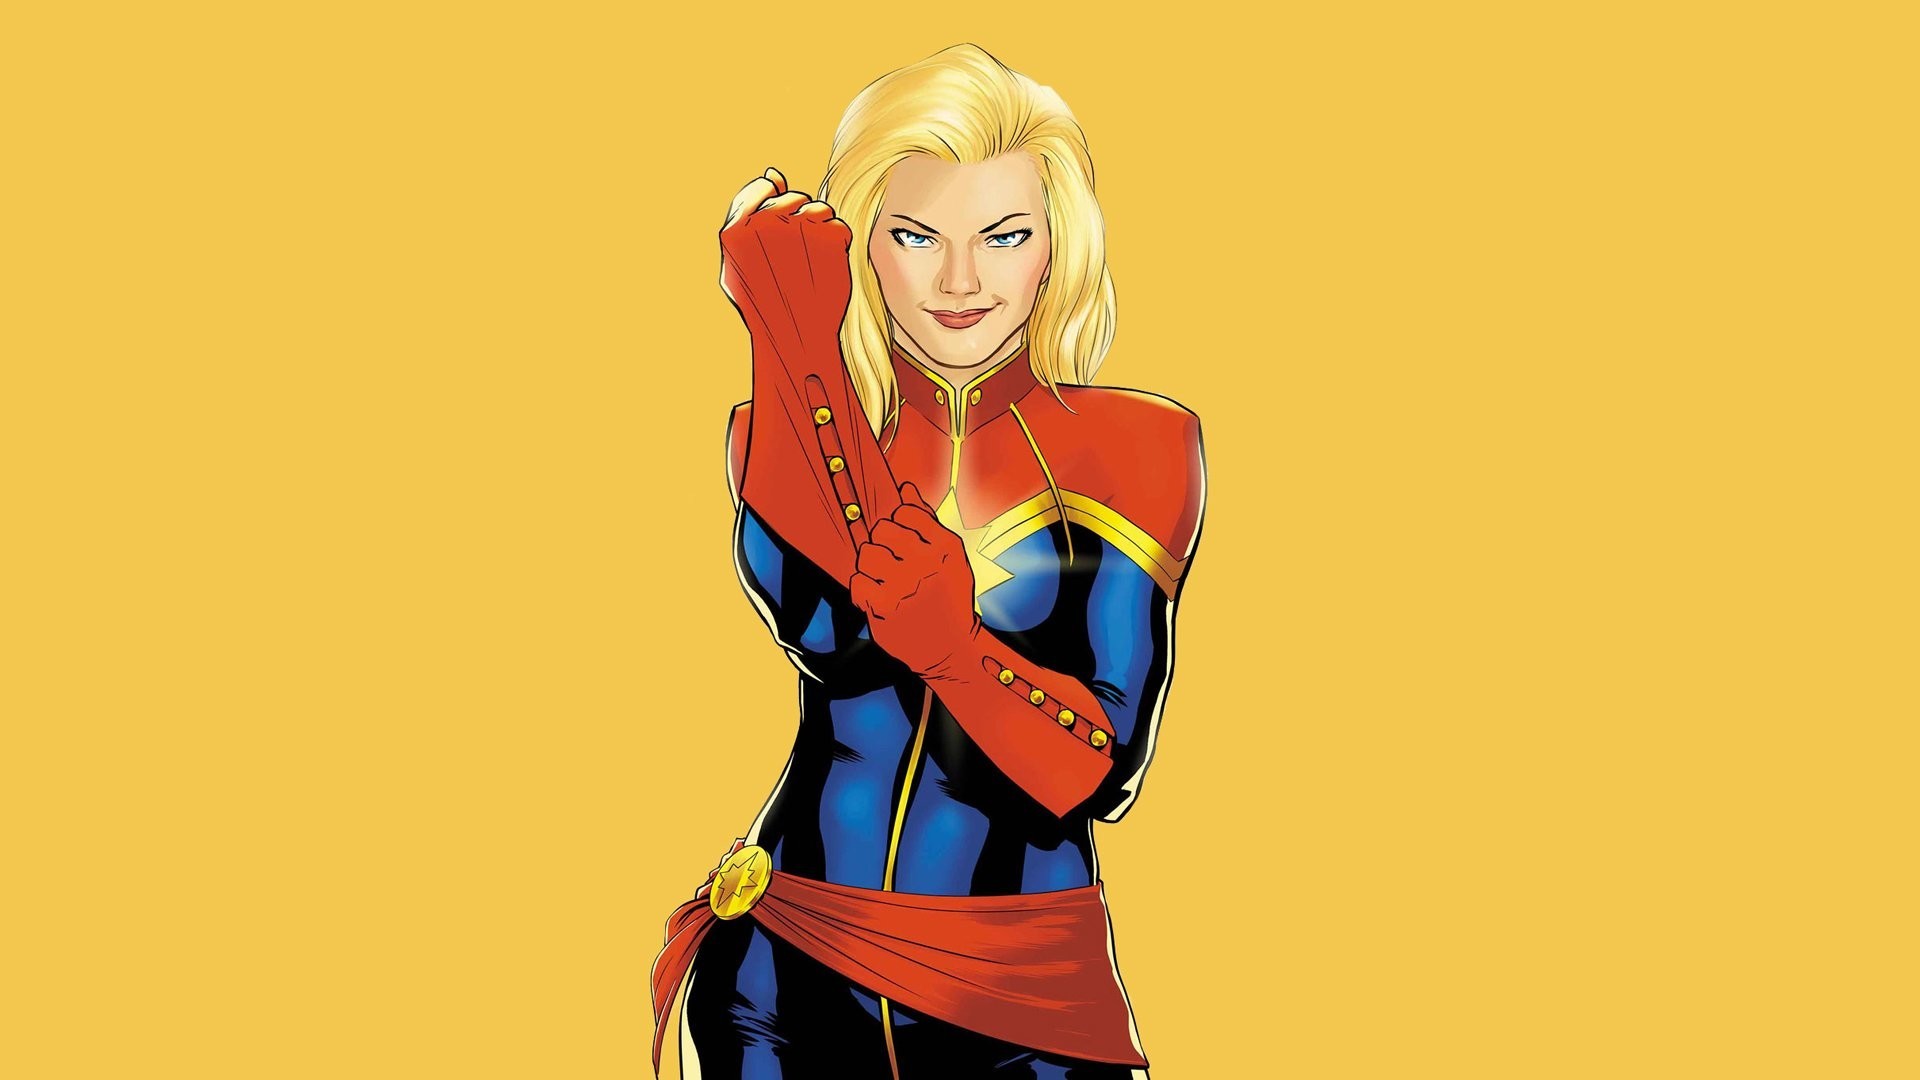 HD Wallpaper Captain Marvel Animated with high-resolution 1920x1080 pixel. You can use this wallpaper for your Desktop Computer Backgrounds, Mac Wallpapers, Android Lock screen or iPhone Screensavers and another smartphone device